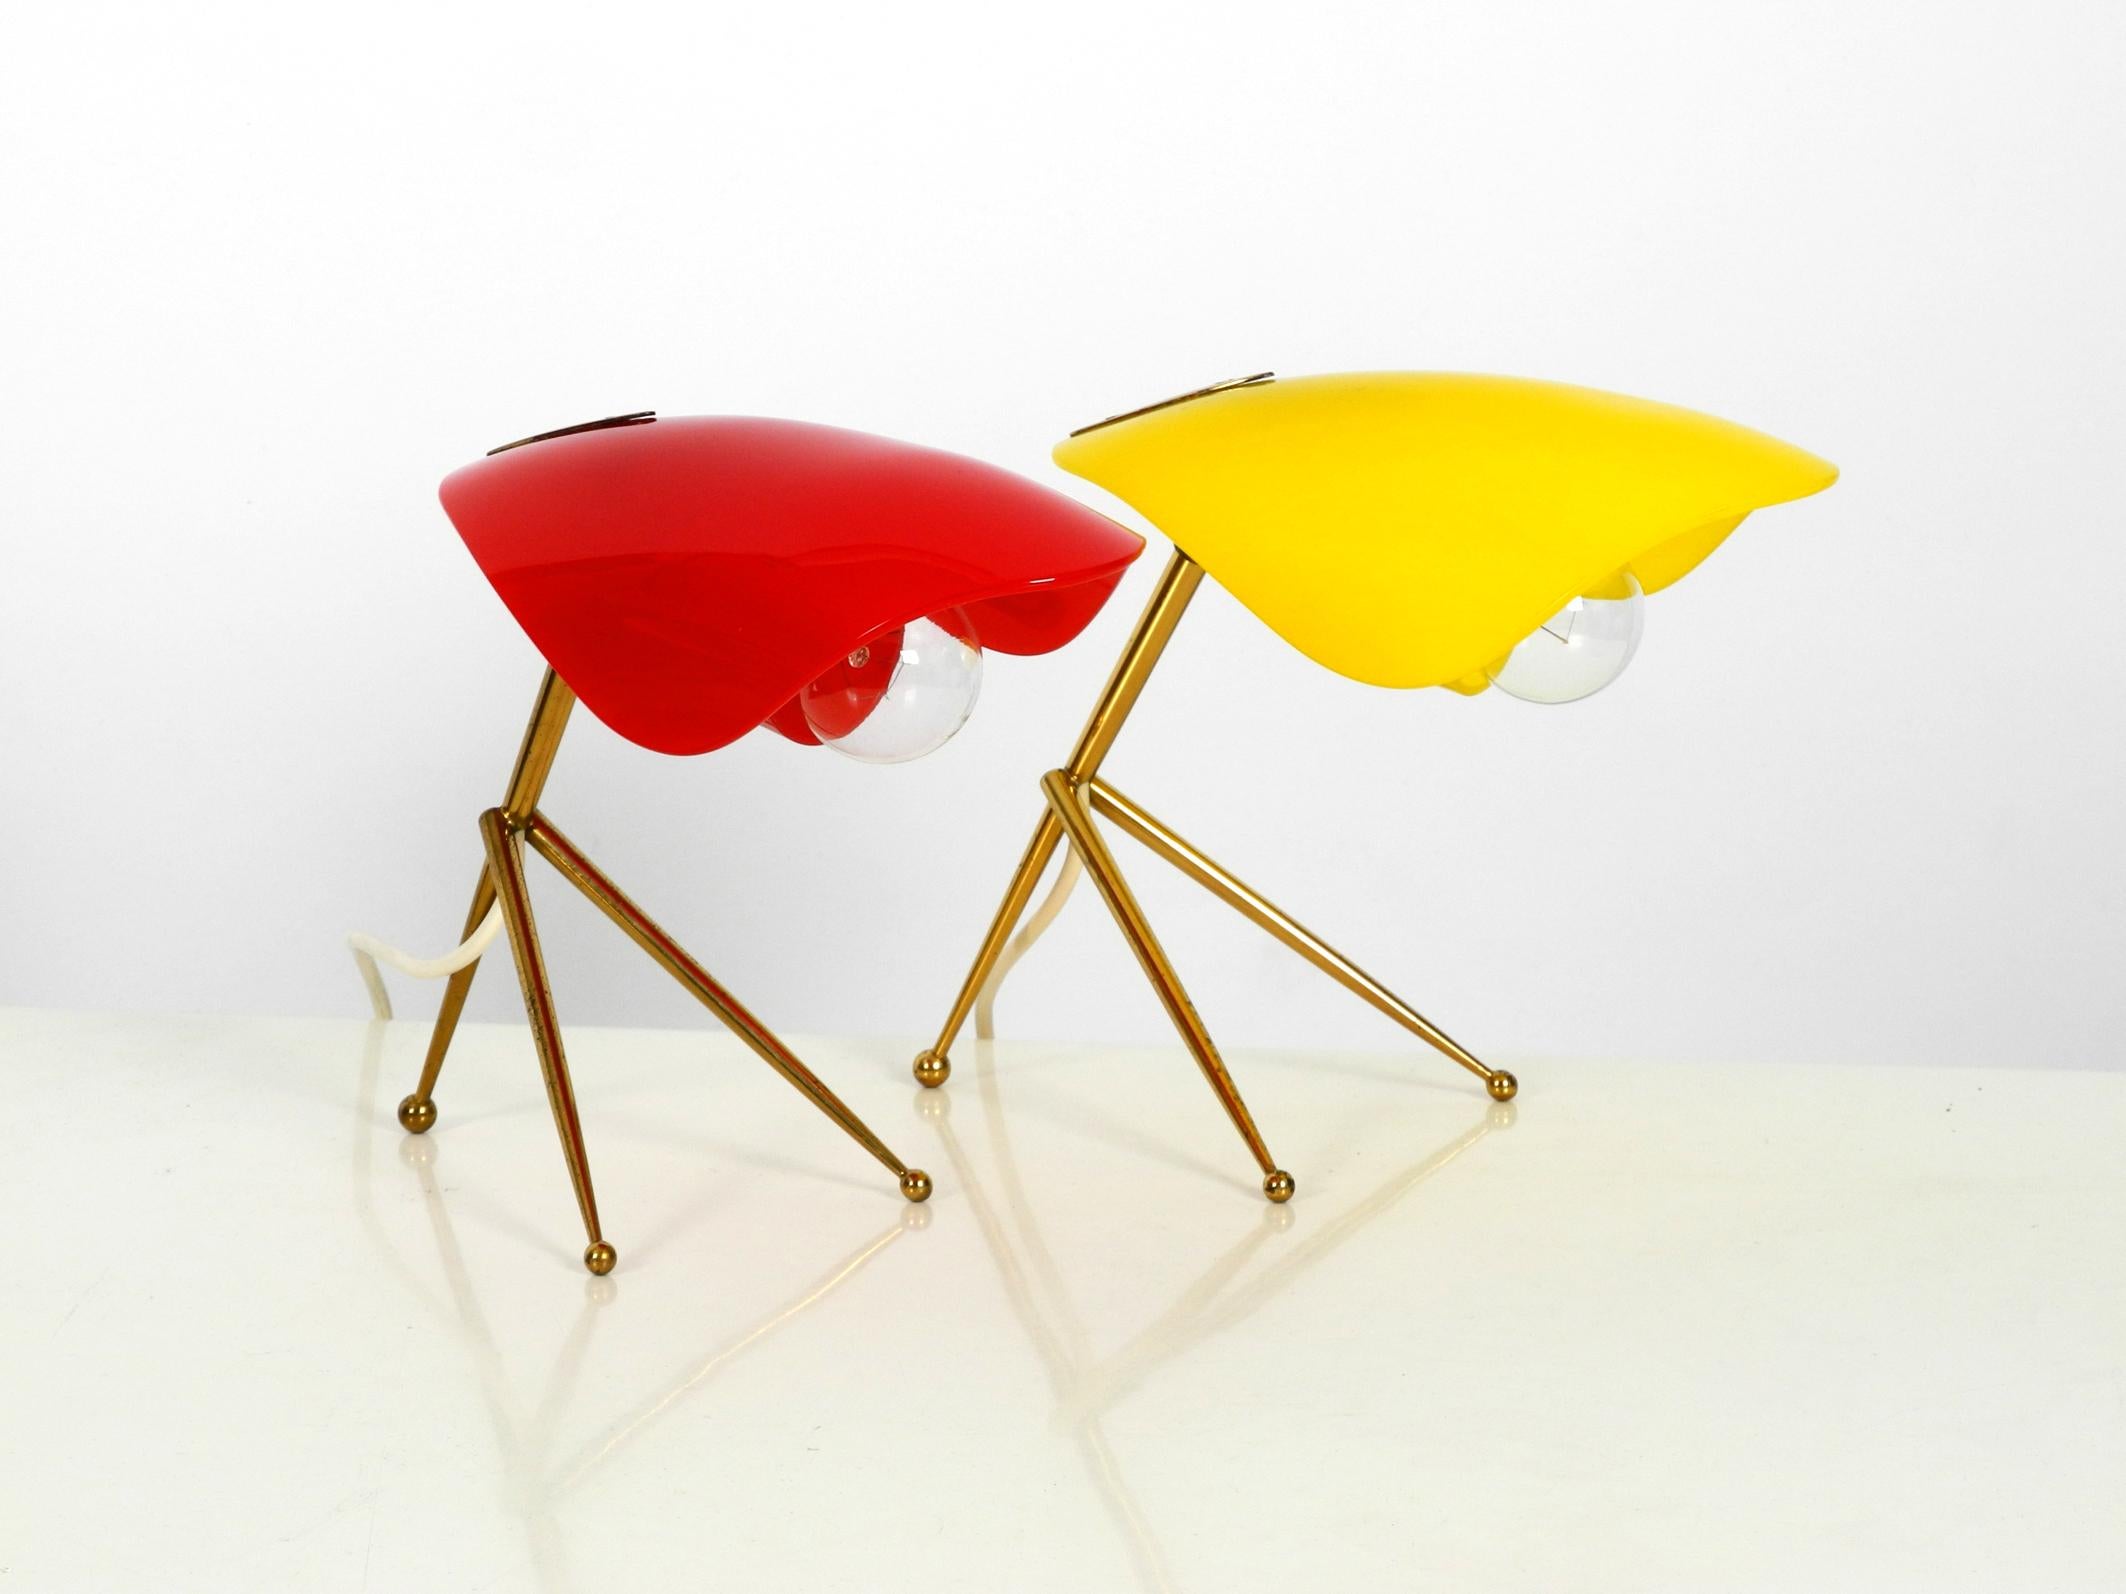 Pair of Rare Midcentury Table Lamps by WKR Germany with Plexiglass Lampshades For Sale 13